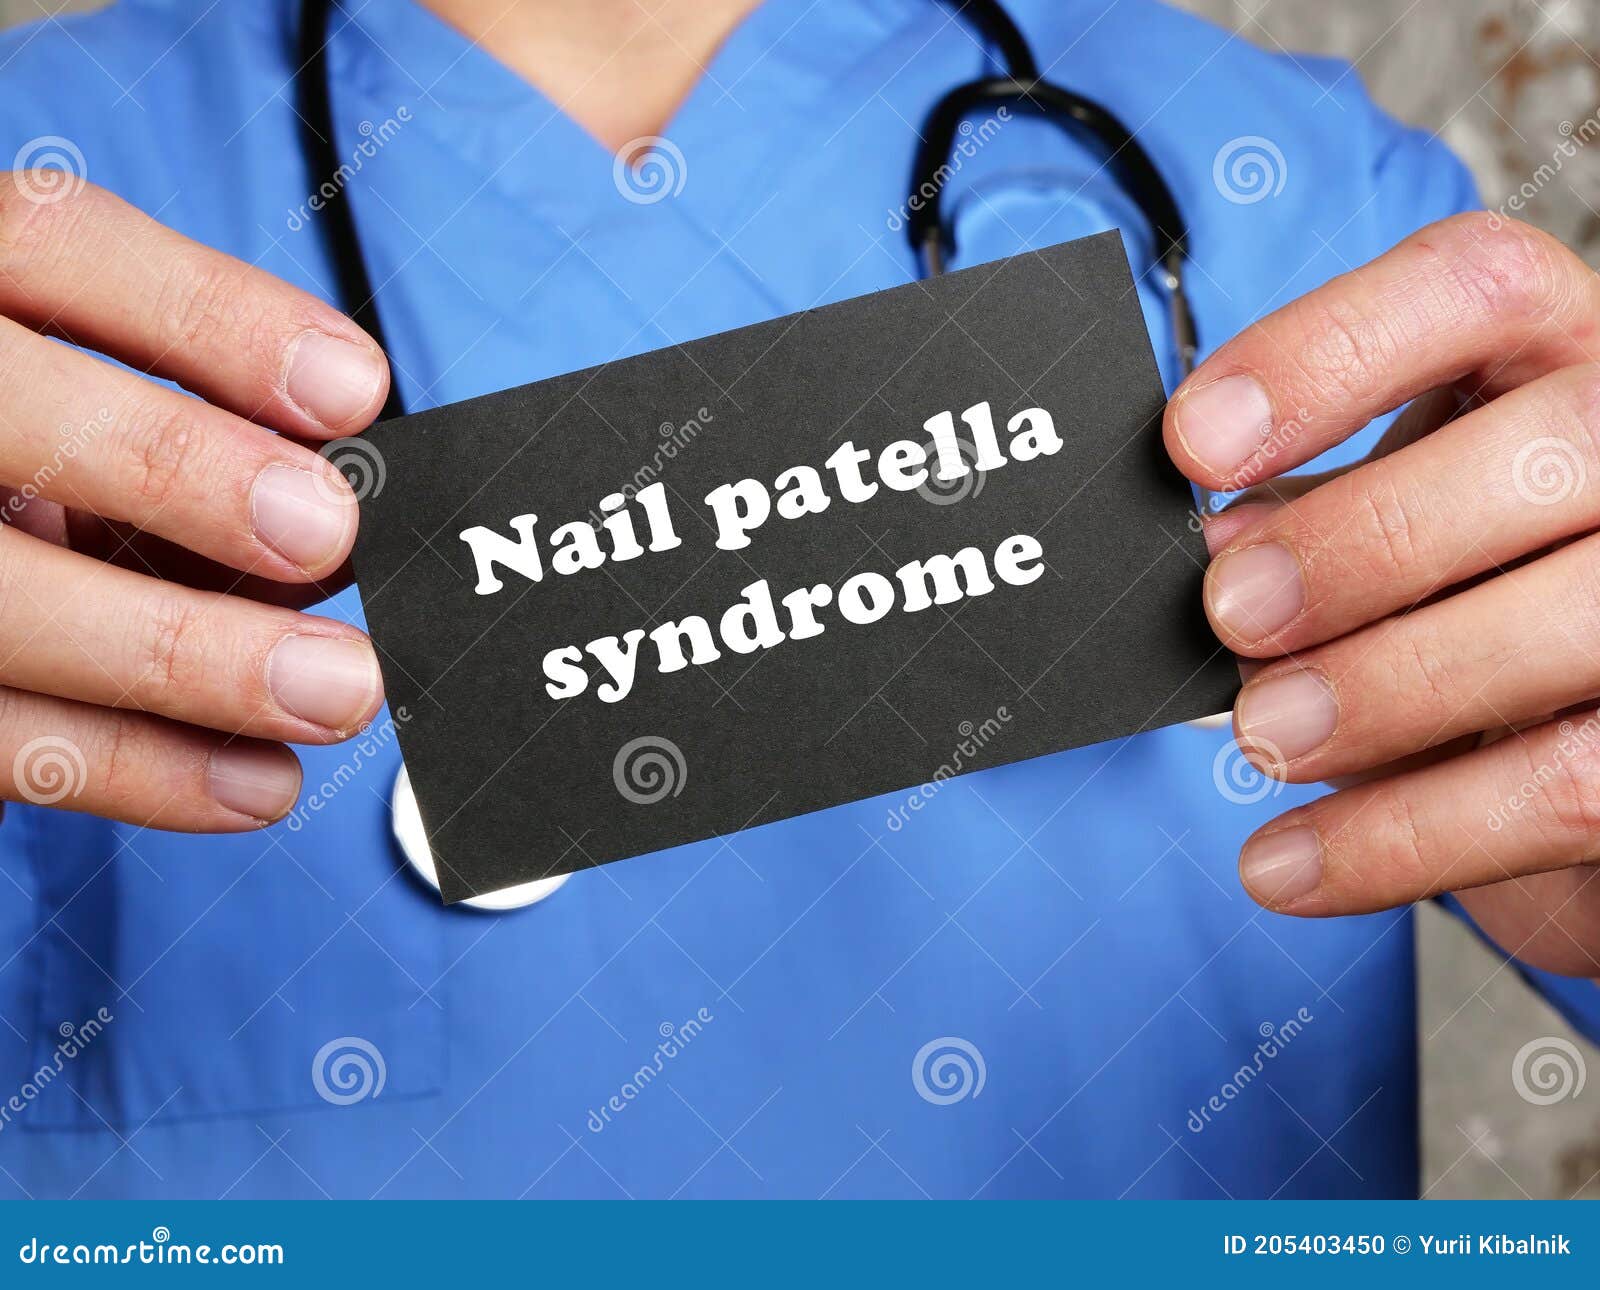 Cureus | “Knee-Ding” a Diagnosis: A Case of Nail Patella Syndrome | Article